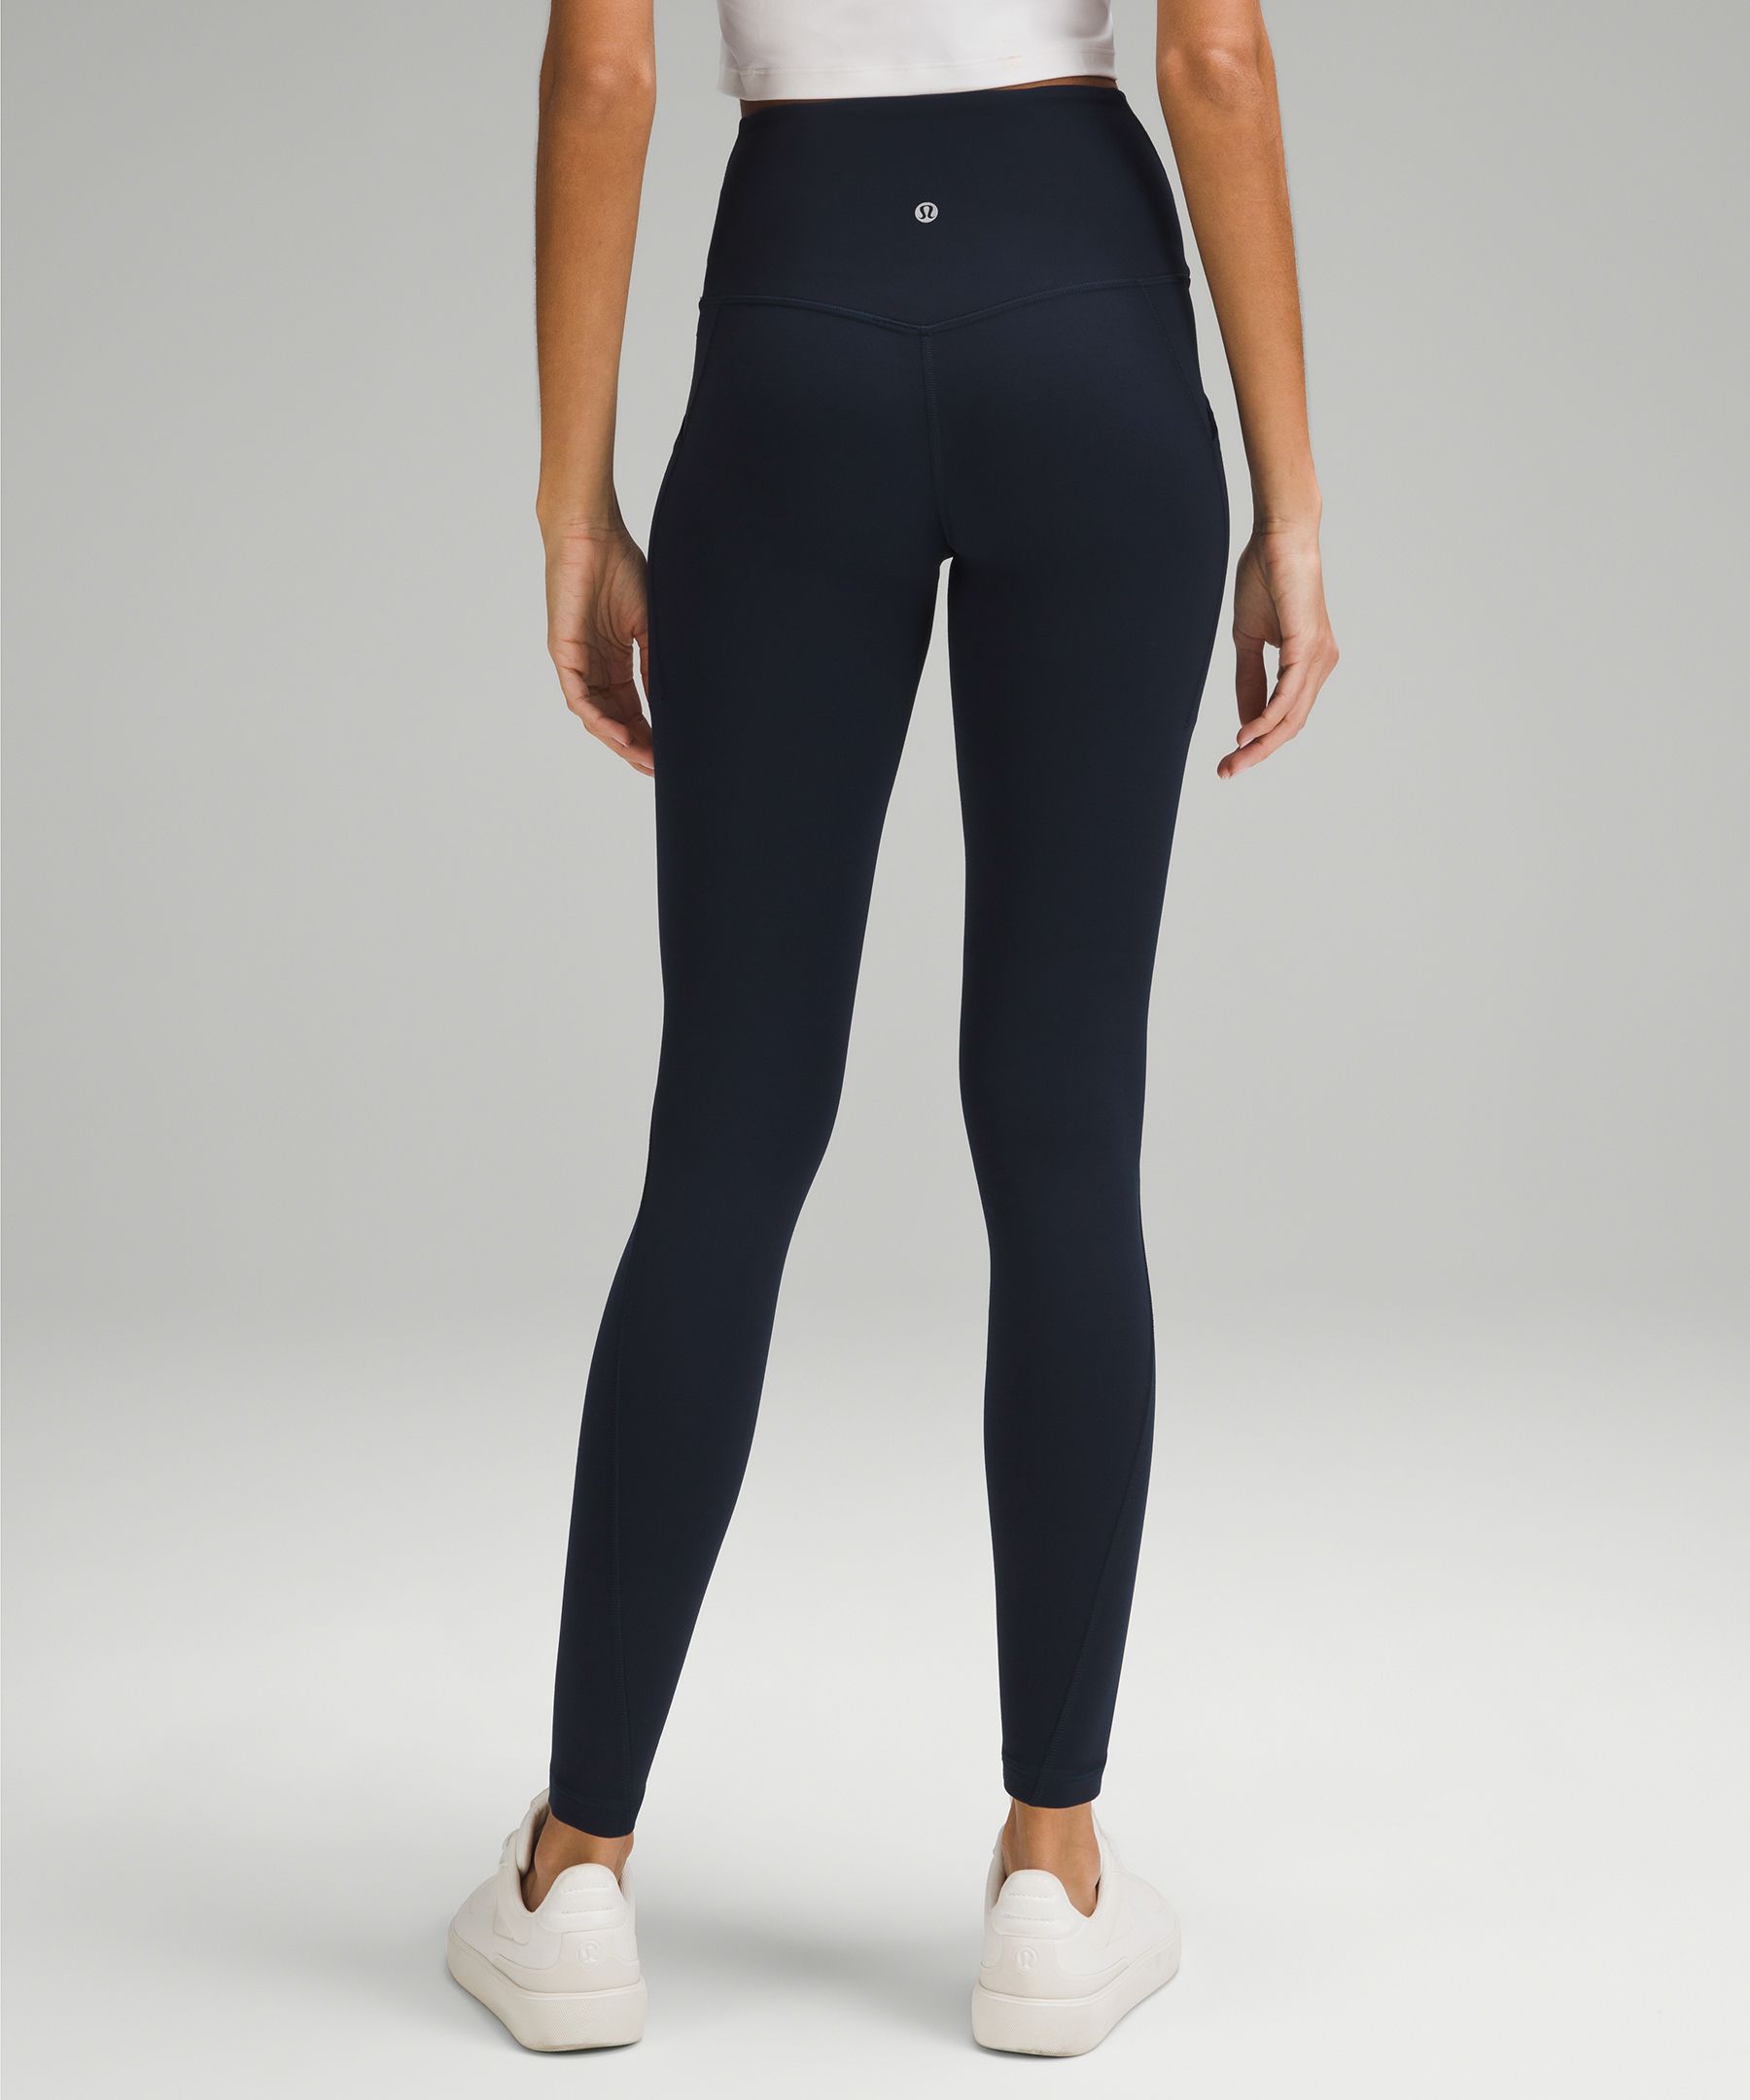 Lululemon Base Pace High-Rise Tight Leggings Multiple Size 4 - $70 (40% Off  Retail) New With Tags - From Ellie